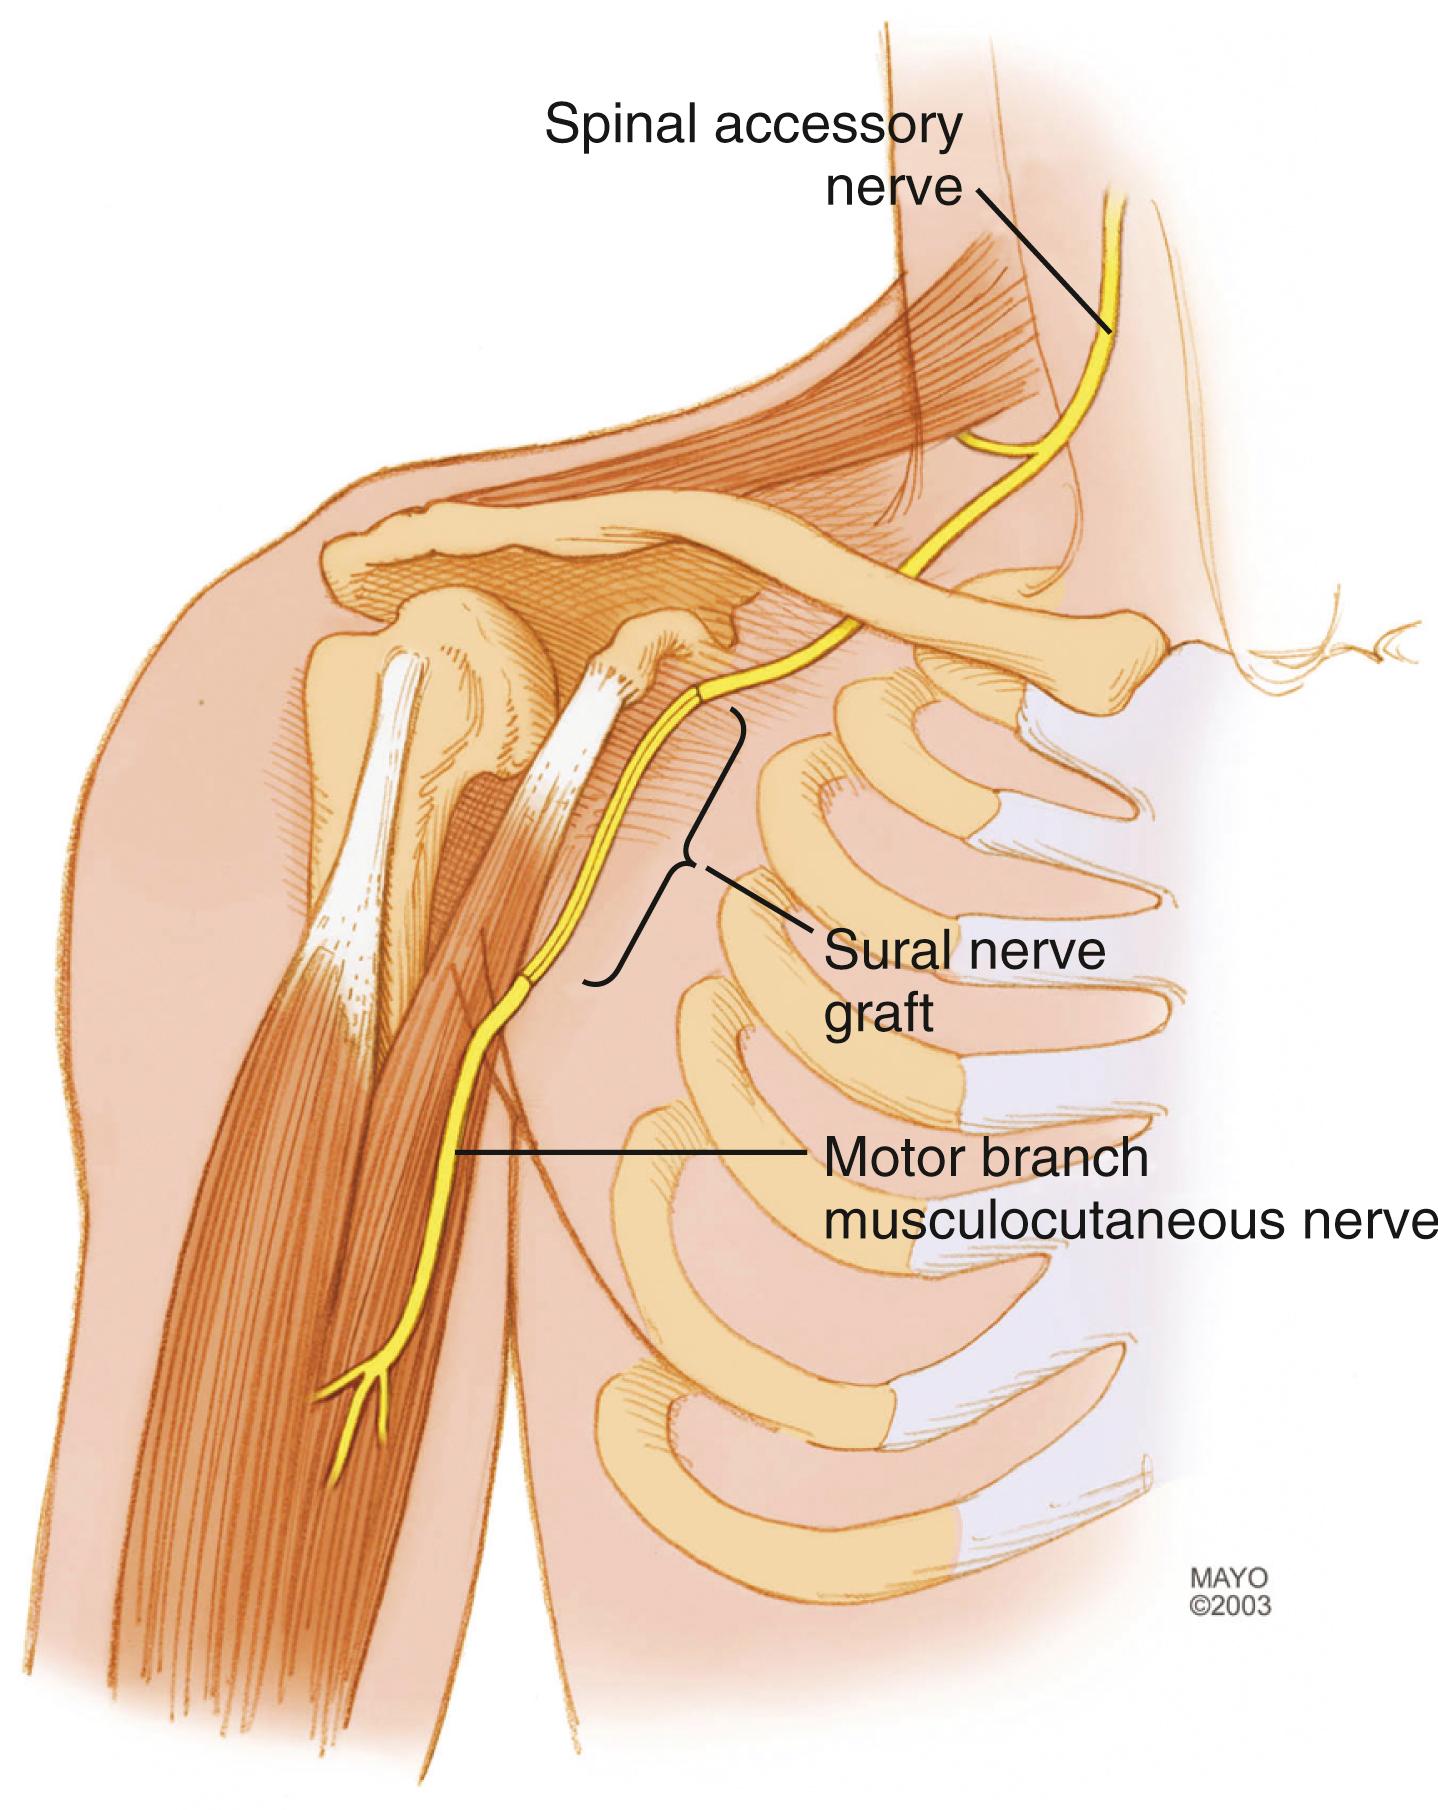 Fig. 34.20, The spinal accessory nerve can be used to transfer to the musculocutaneous nerve (as shown) or the biceps and brachialis branches with an interposition graft.